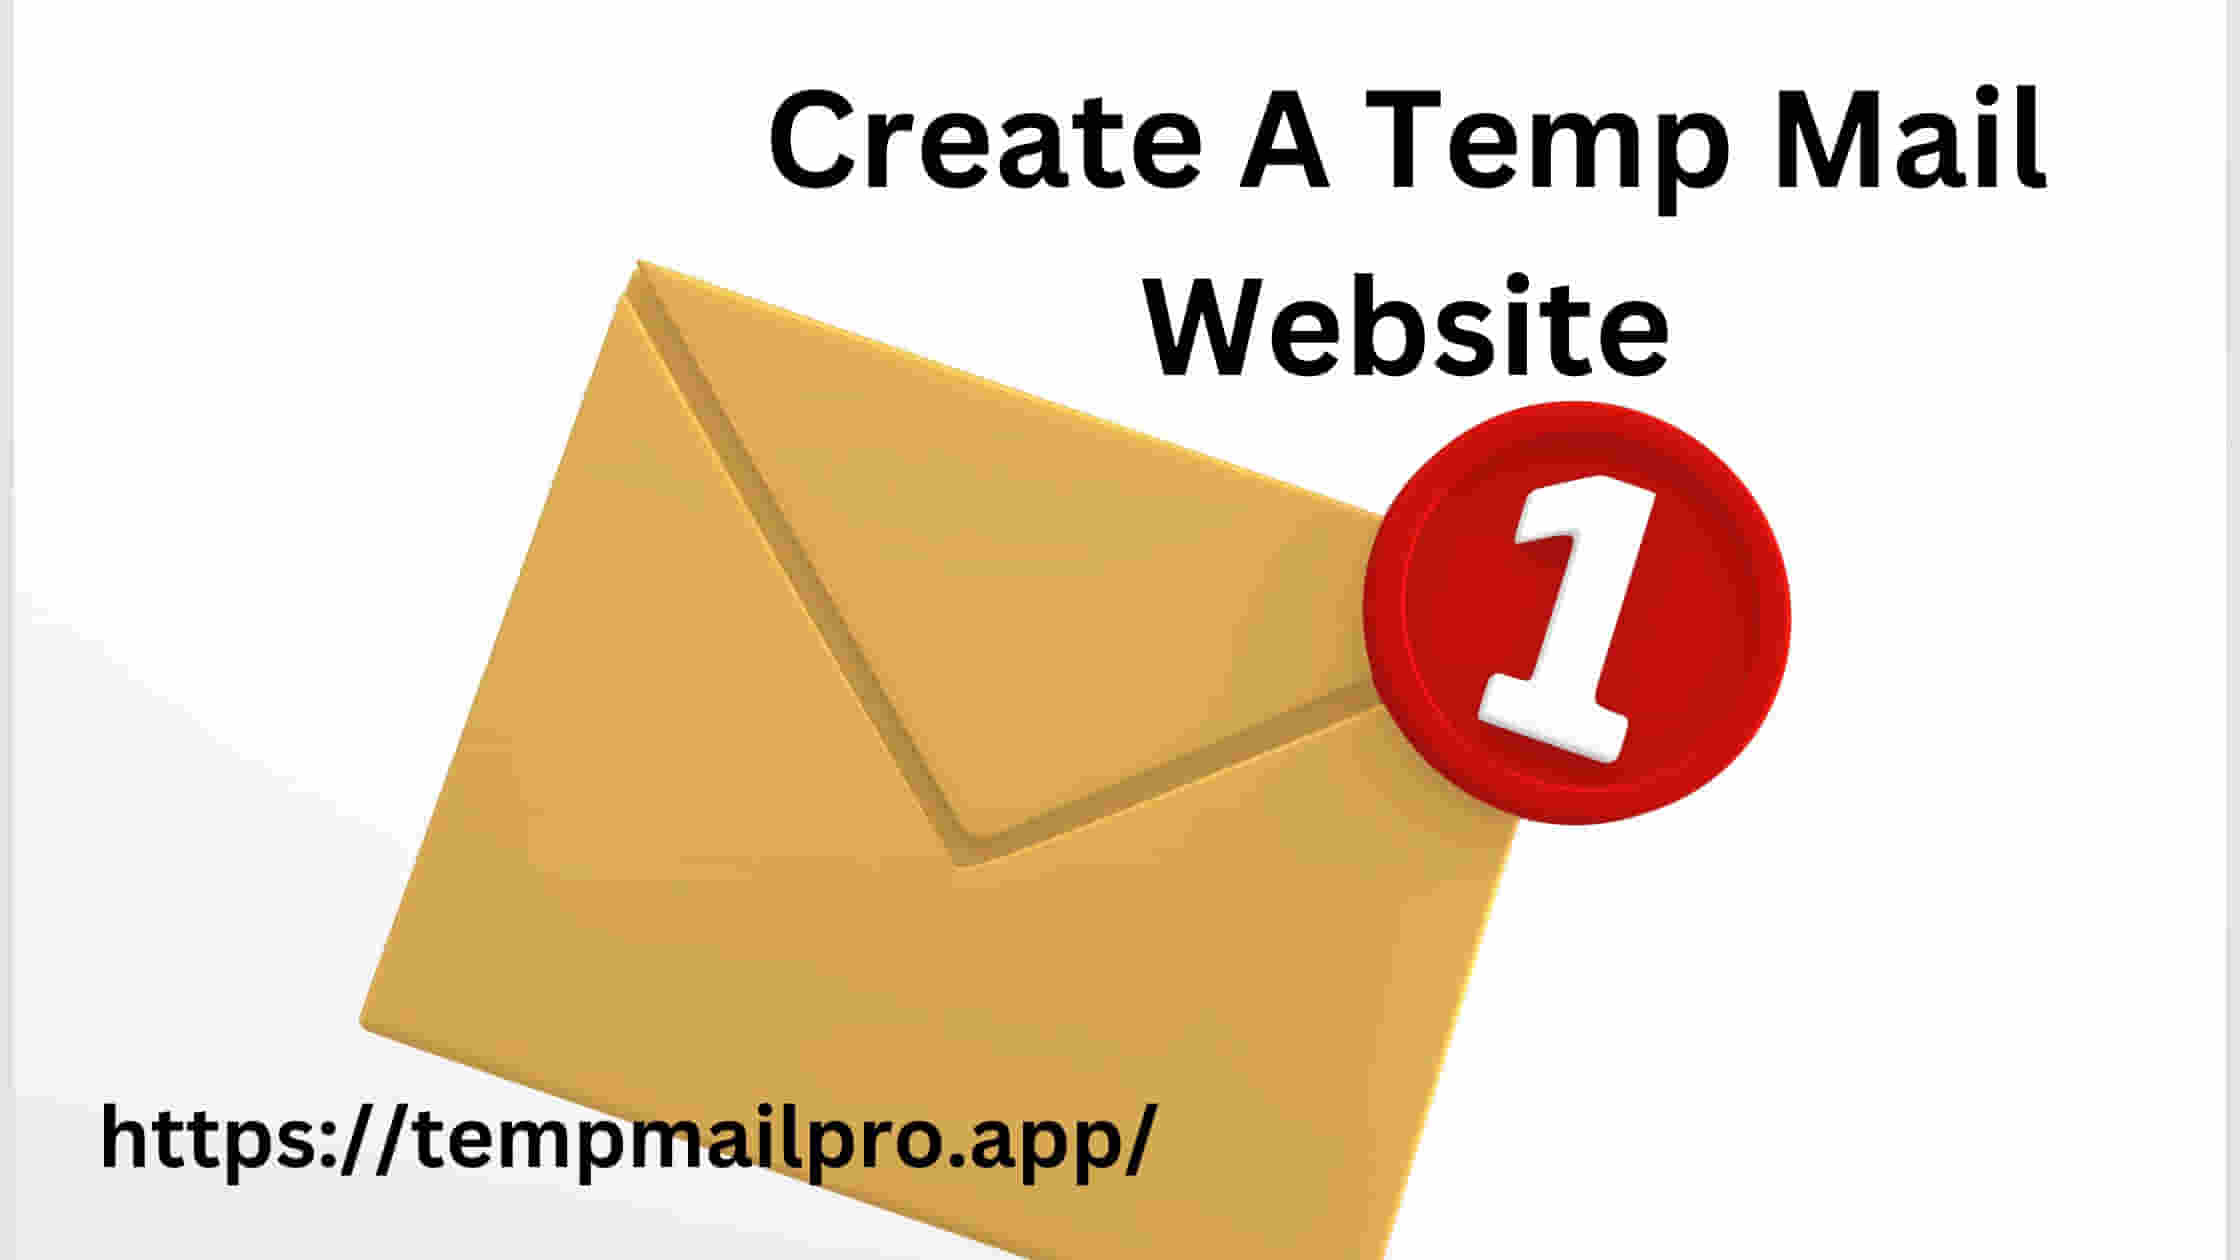 How To Create A Temp Mail Website? Step-By-Step Guide